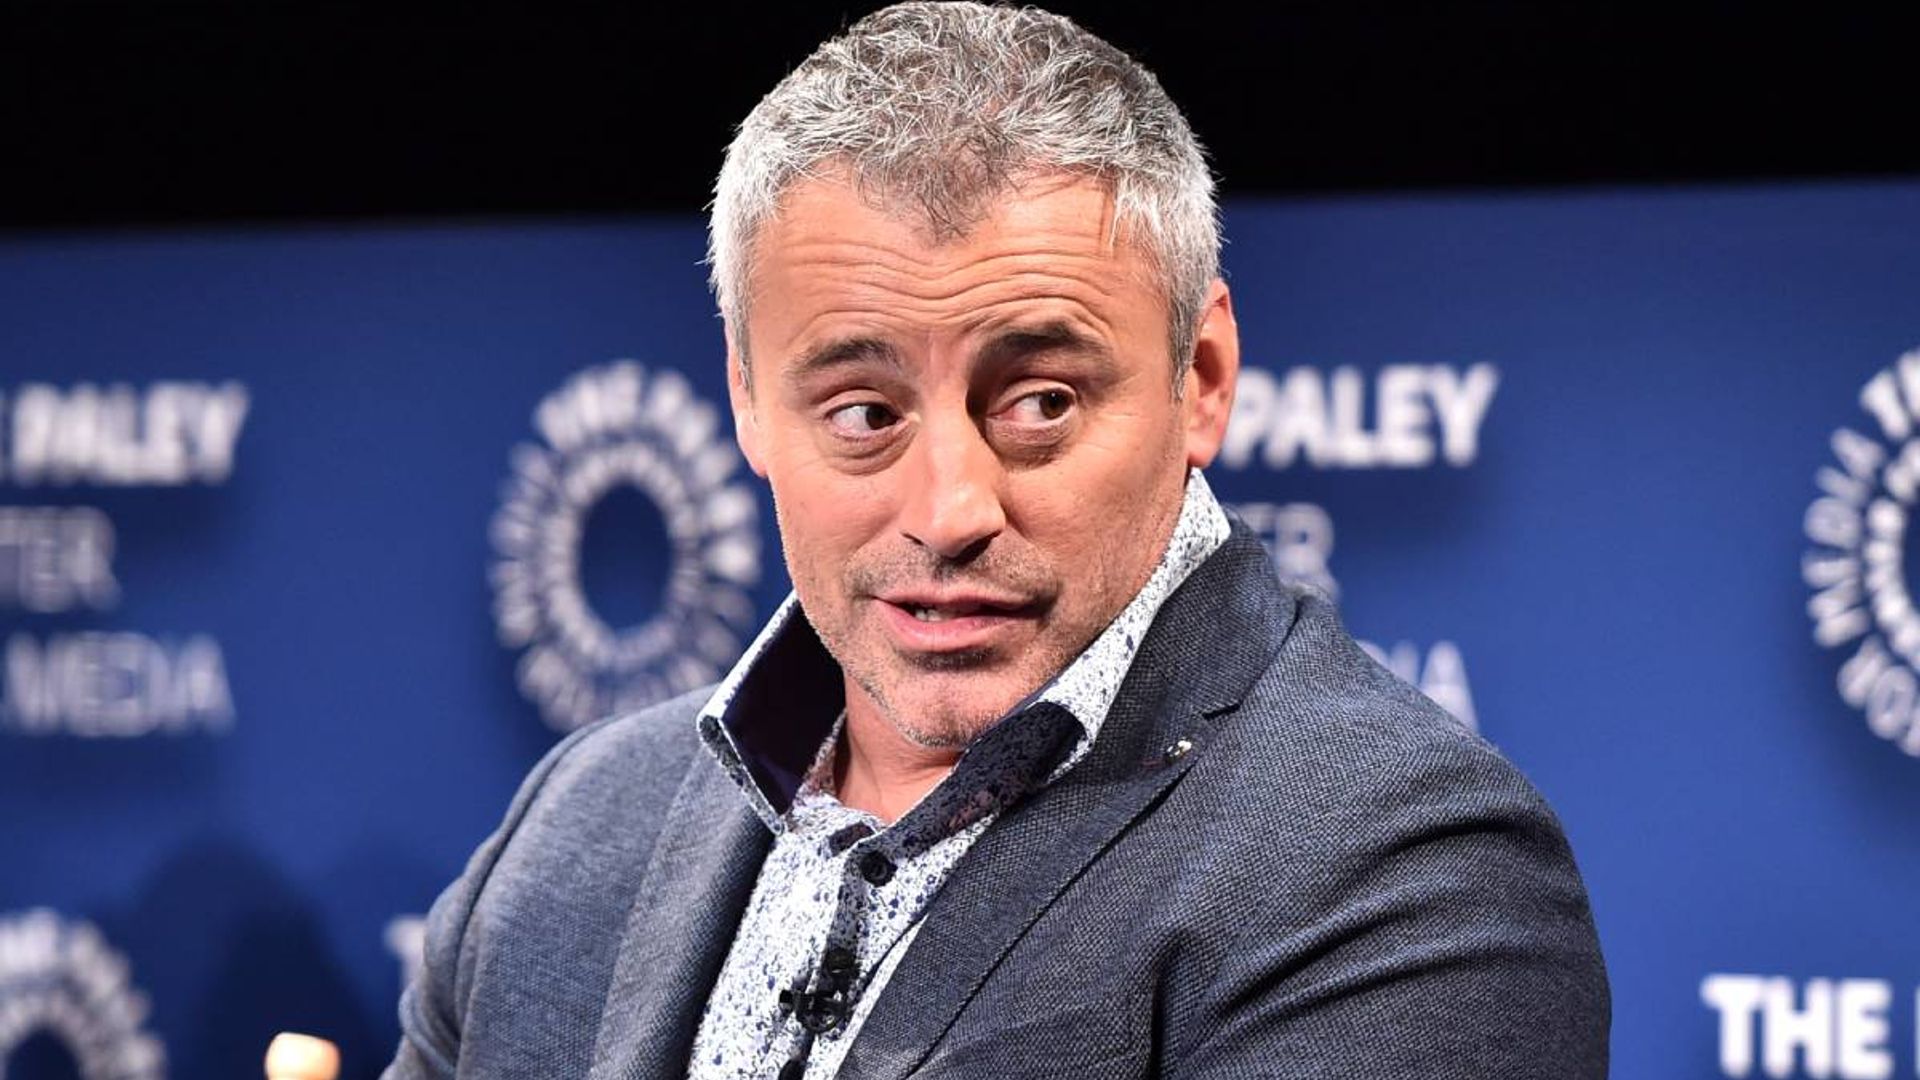 Matt LeBlanc on the Friends reunion has Twitter in a frenzy - here's why!